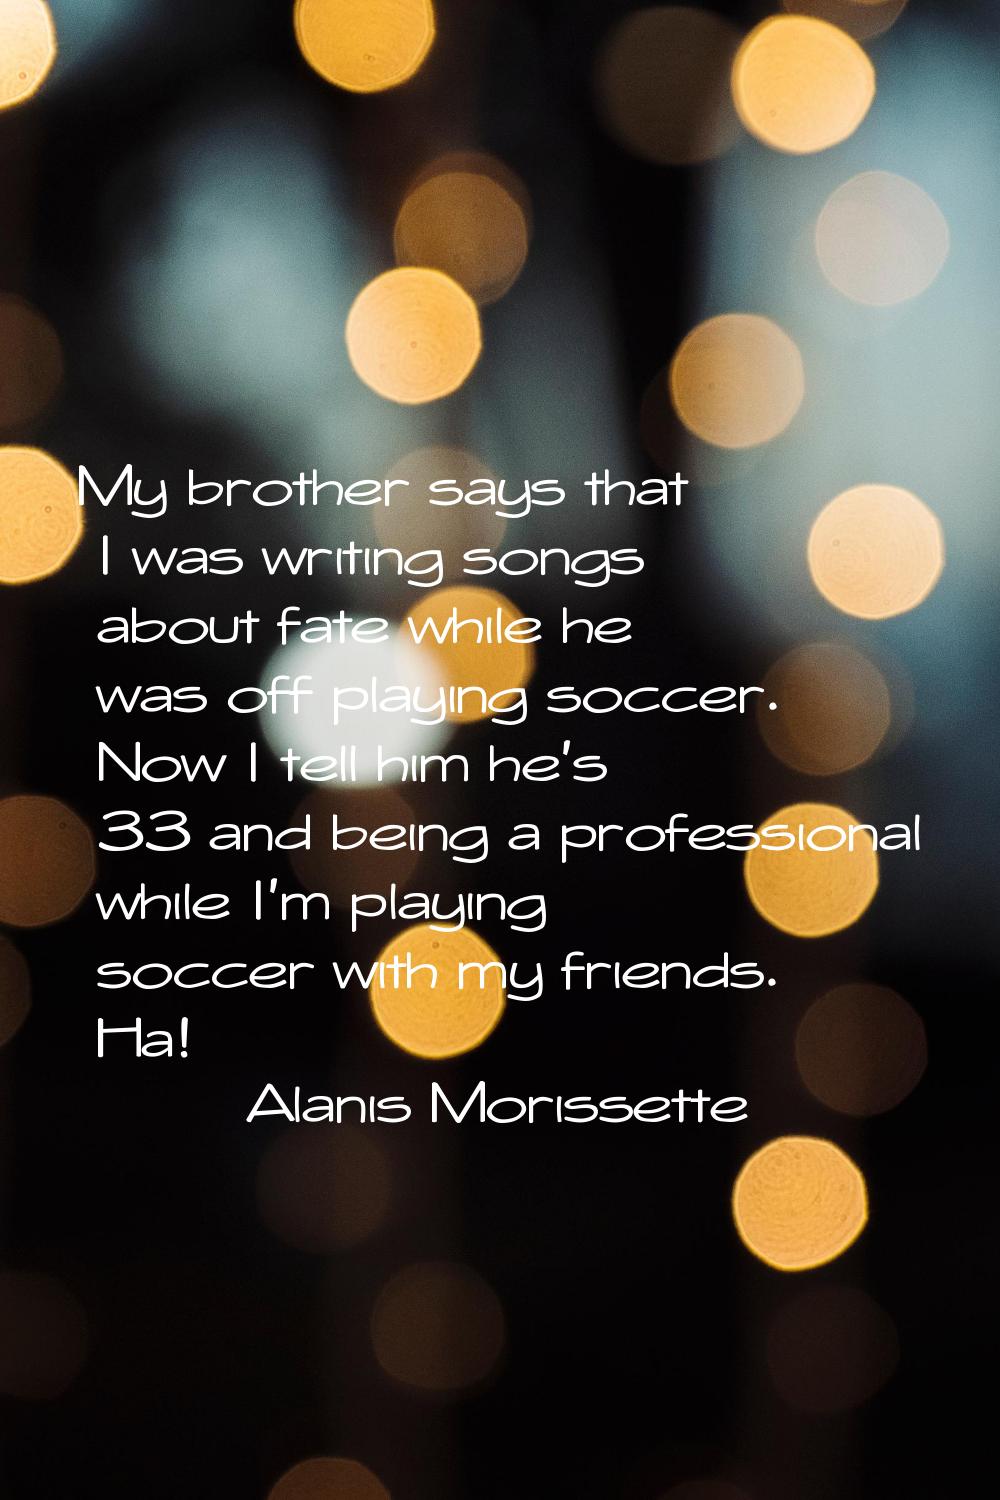 My brother says that I was writing songs about fate while he was off playing soccer. Now I tell him